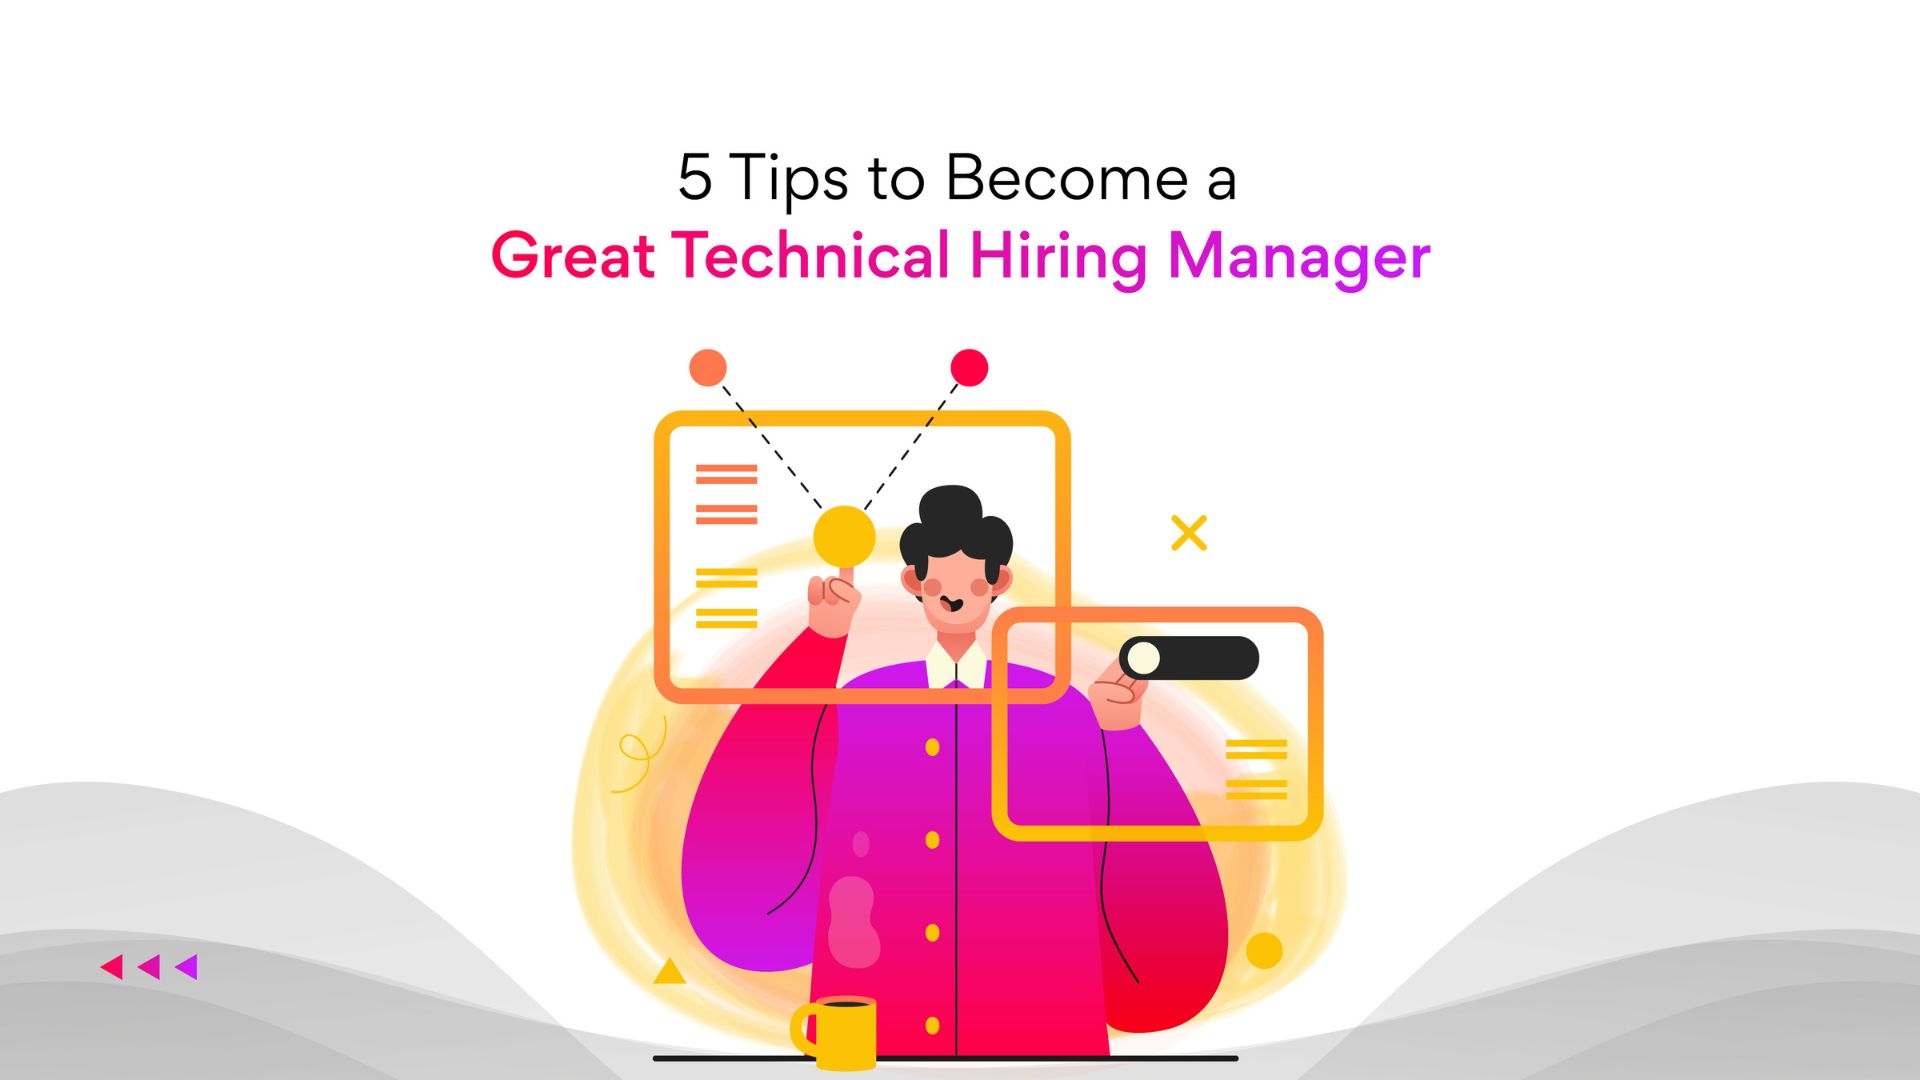 Tips to become a great Technical Hiring Manager